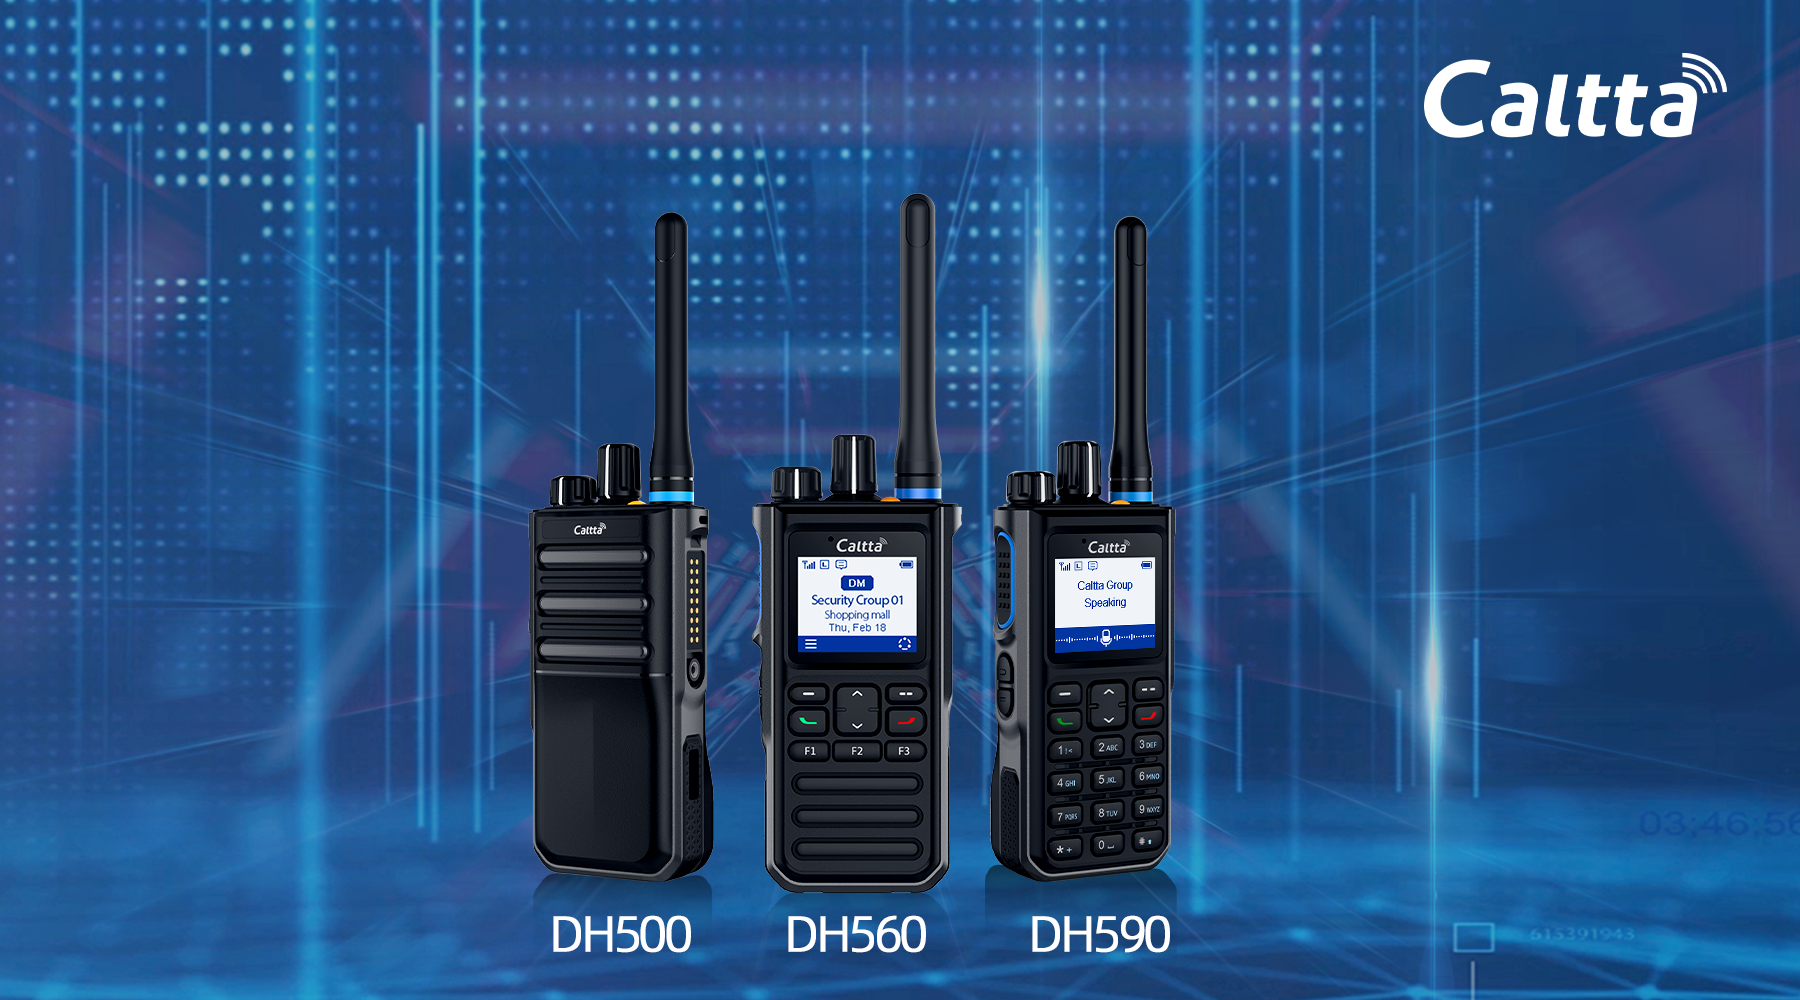 Caltta Expands DMR Portable Radio Series with New Model DH560